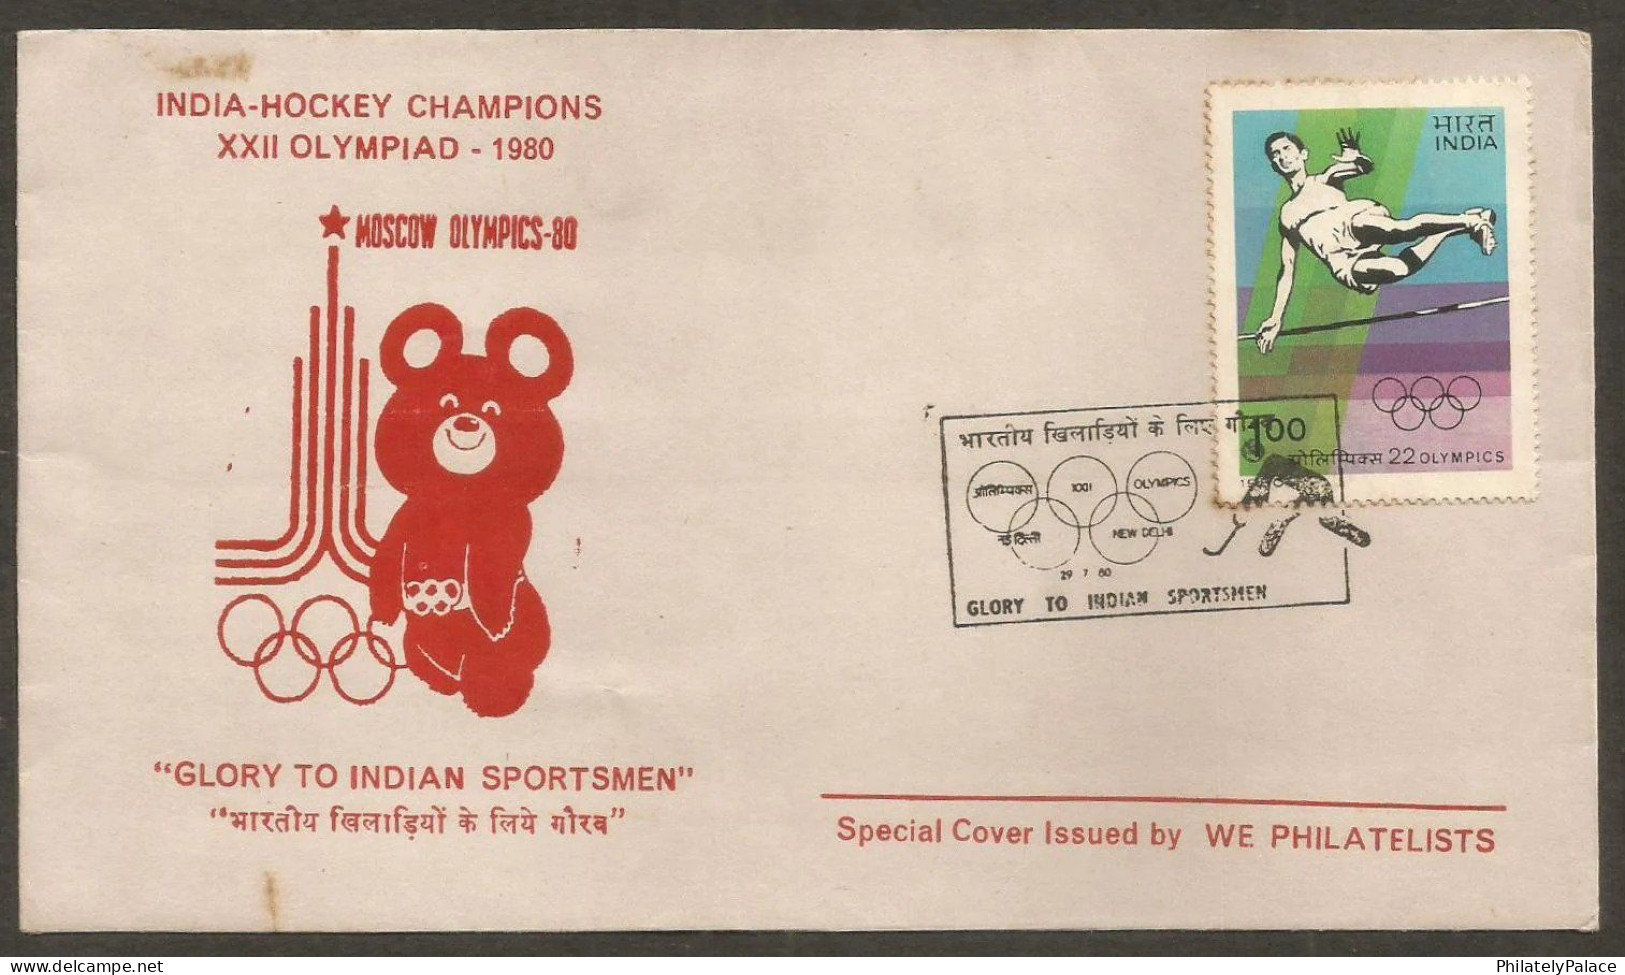 India 1980 Hockey Champion,XXII Olympics,Moscow,Russia, Sportsmen,Misha,Mascot,Bear,Special Cover (**) Inde Indien - Briefe U. Dokumente